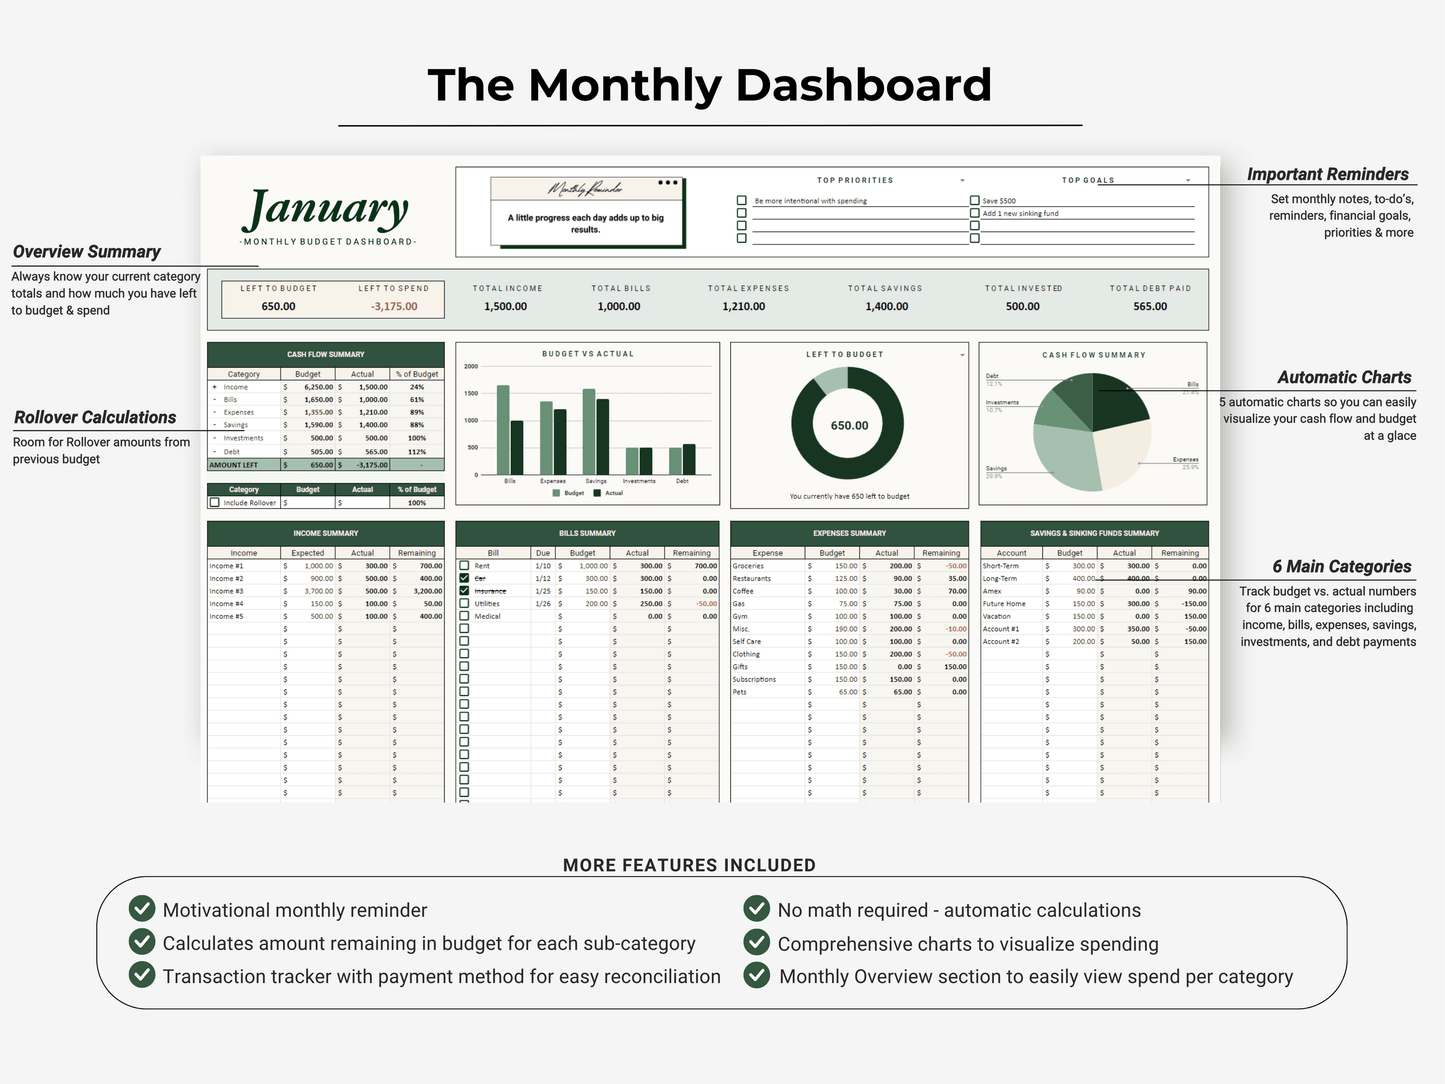 The Ultimate Wealth Dashboard